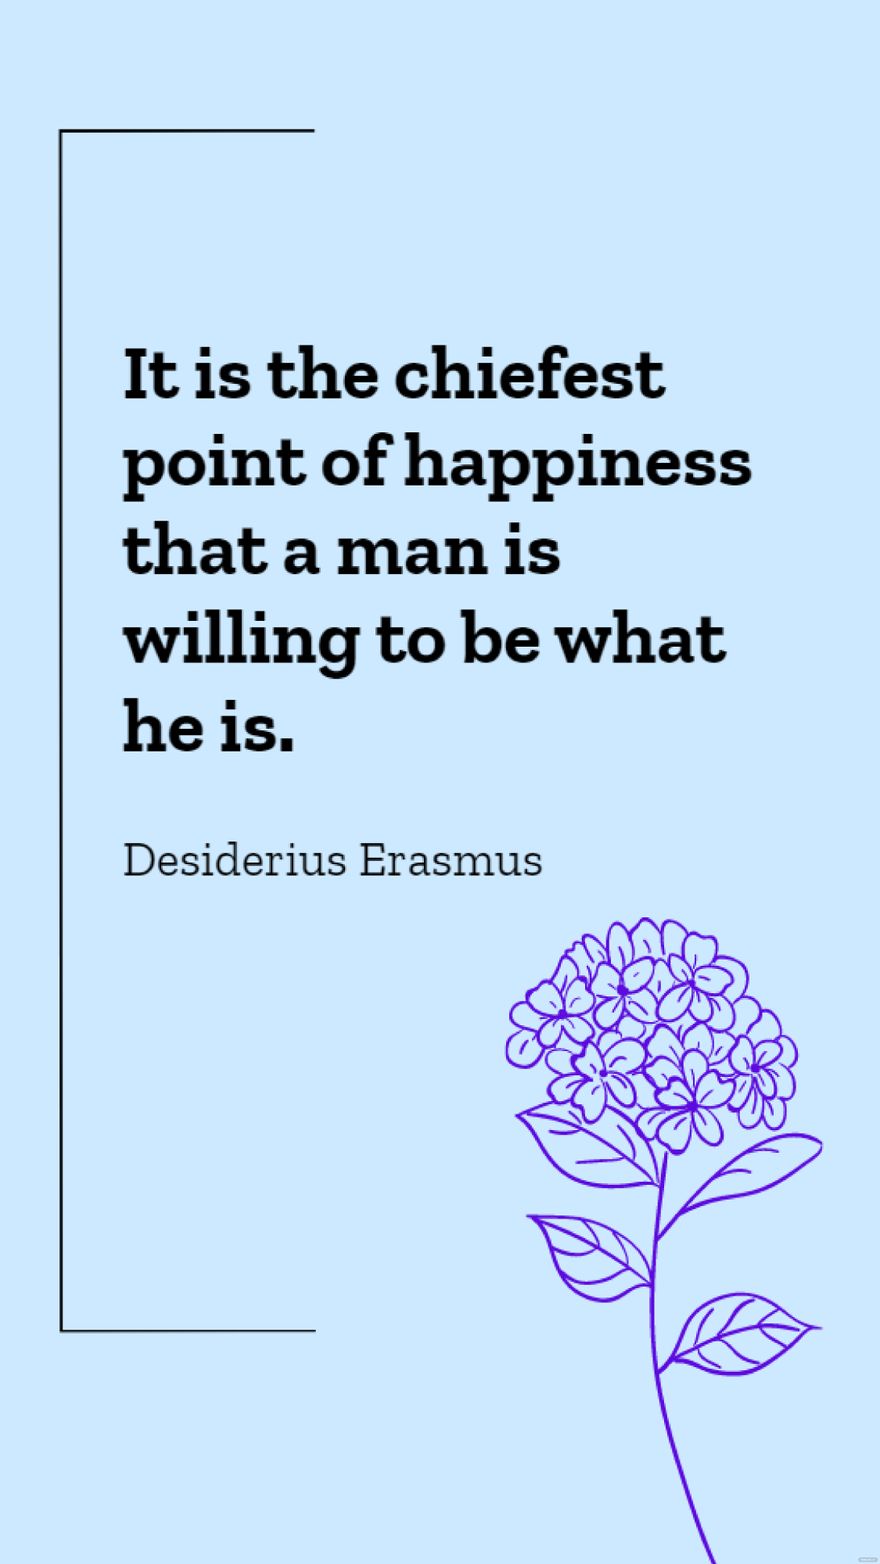 Desiderius Erasmus - It is the chiefest point of happiness that a man is willing to be what he is. in JPG